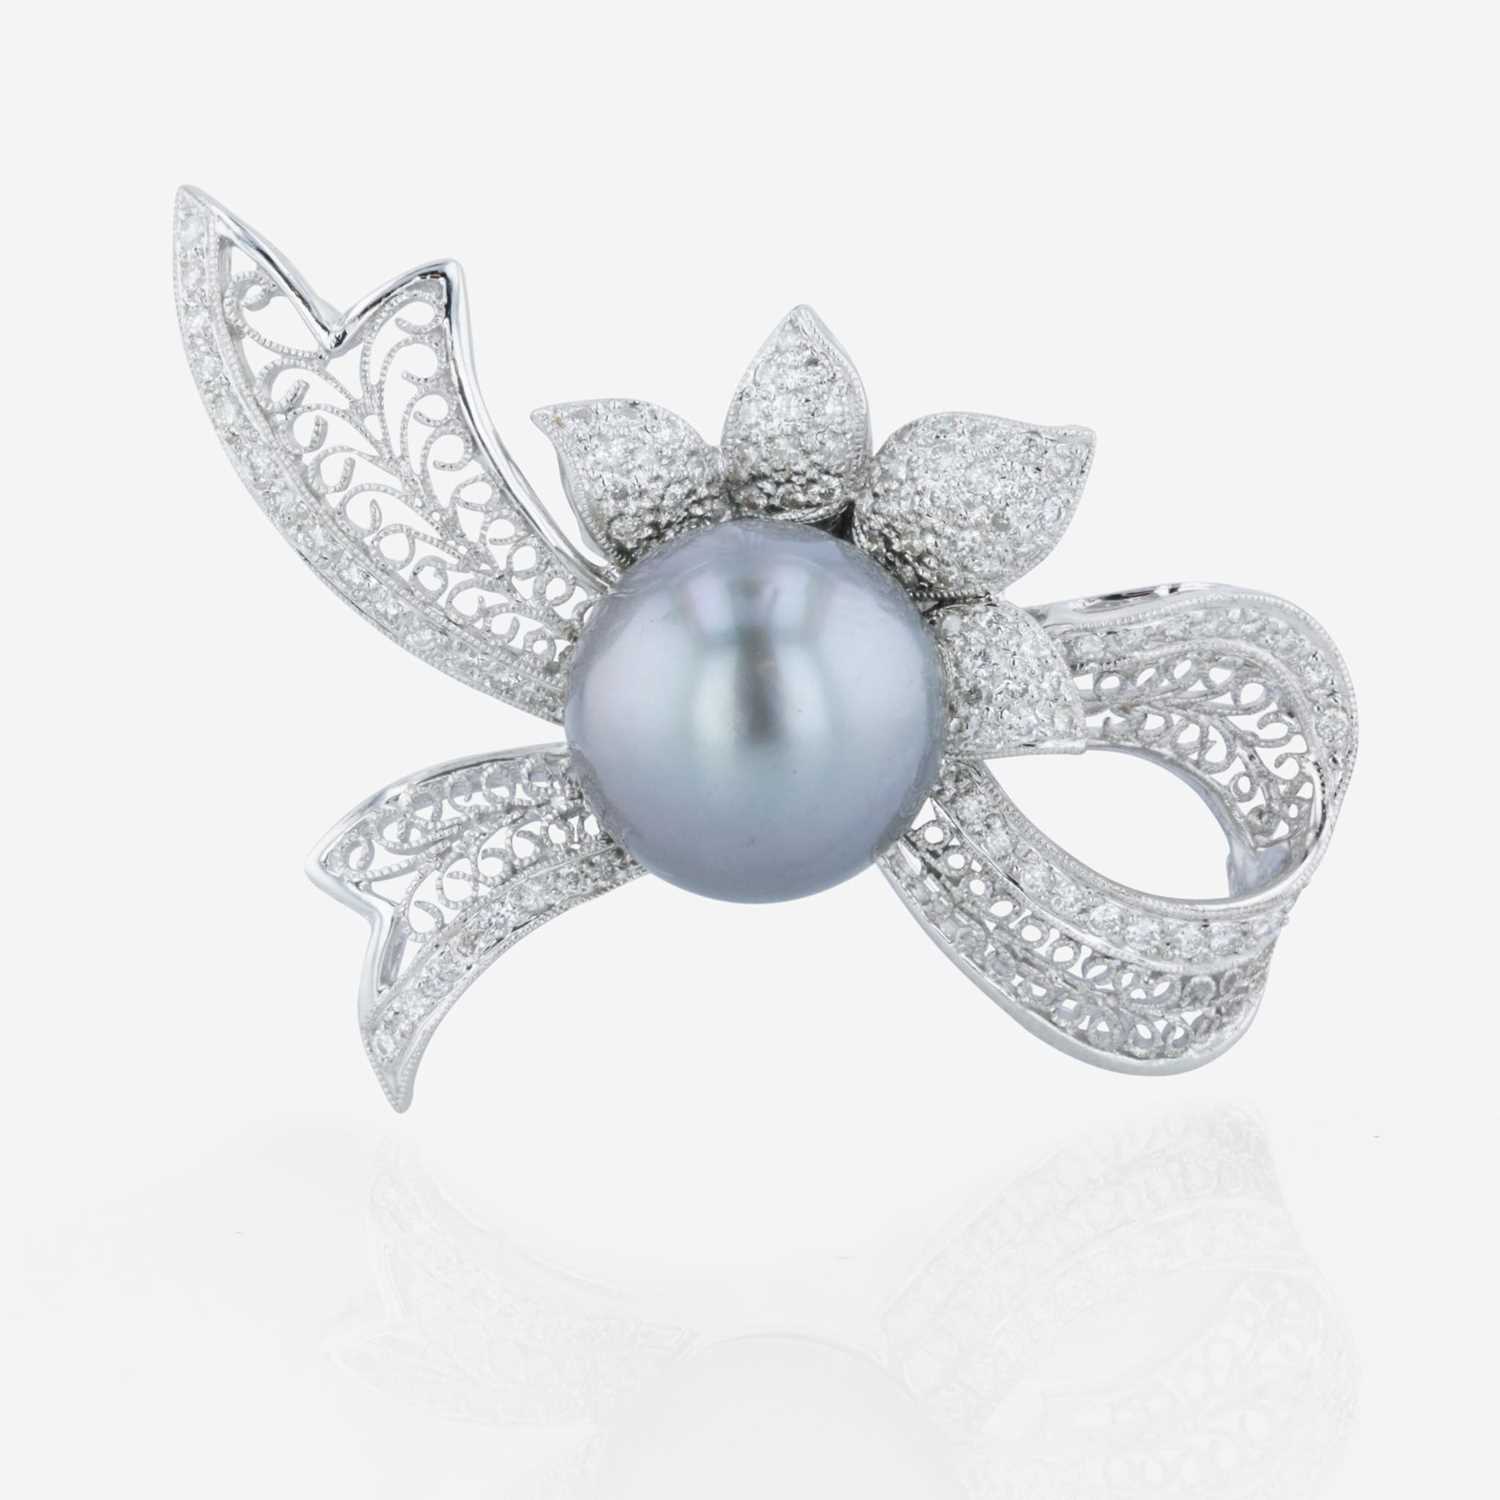 Lot 90 - An 18K white gold, Tahitian cultured pearl, and diamond brooch